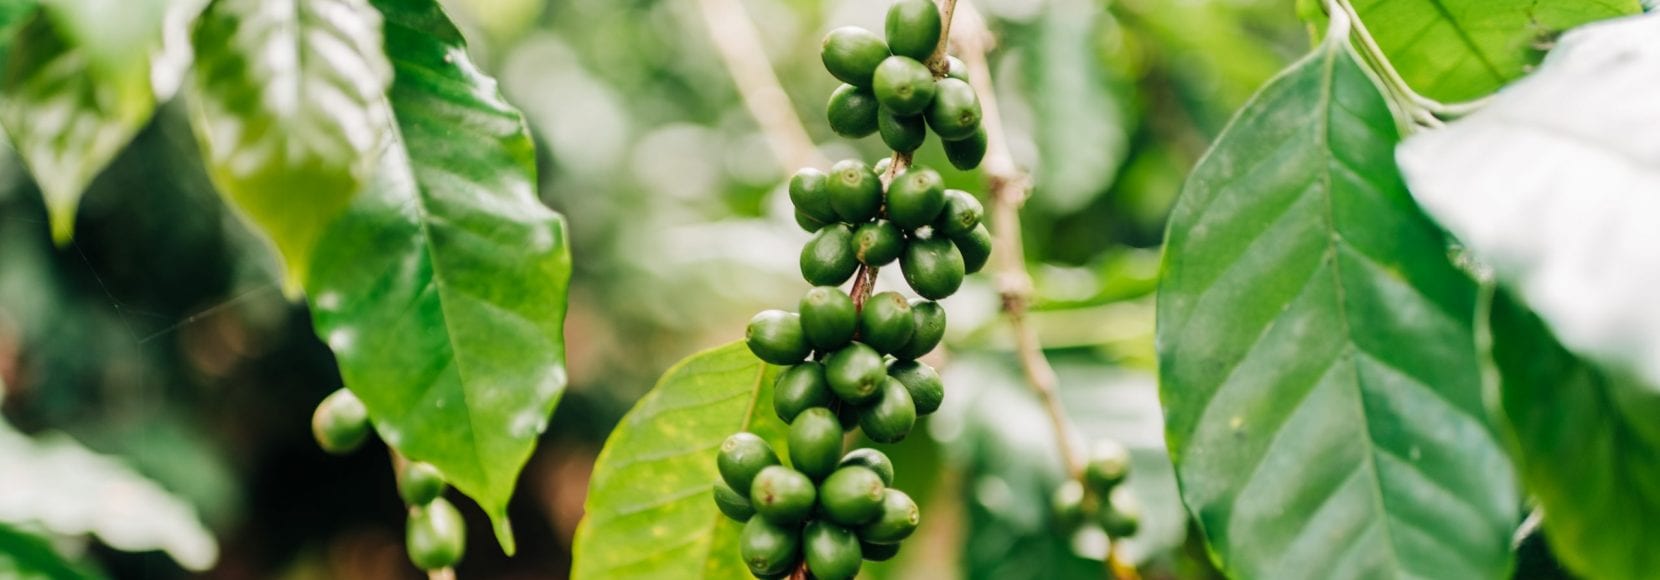 Coffee beans on the vine in Ethiopia